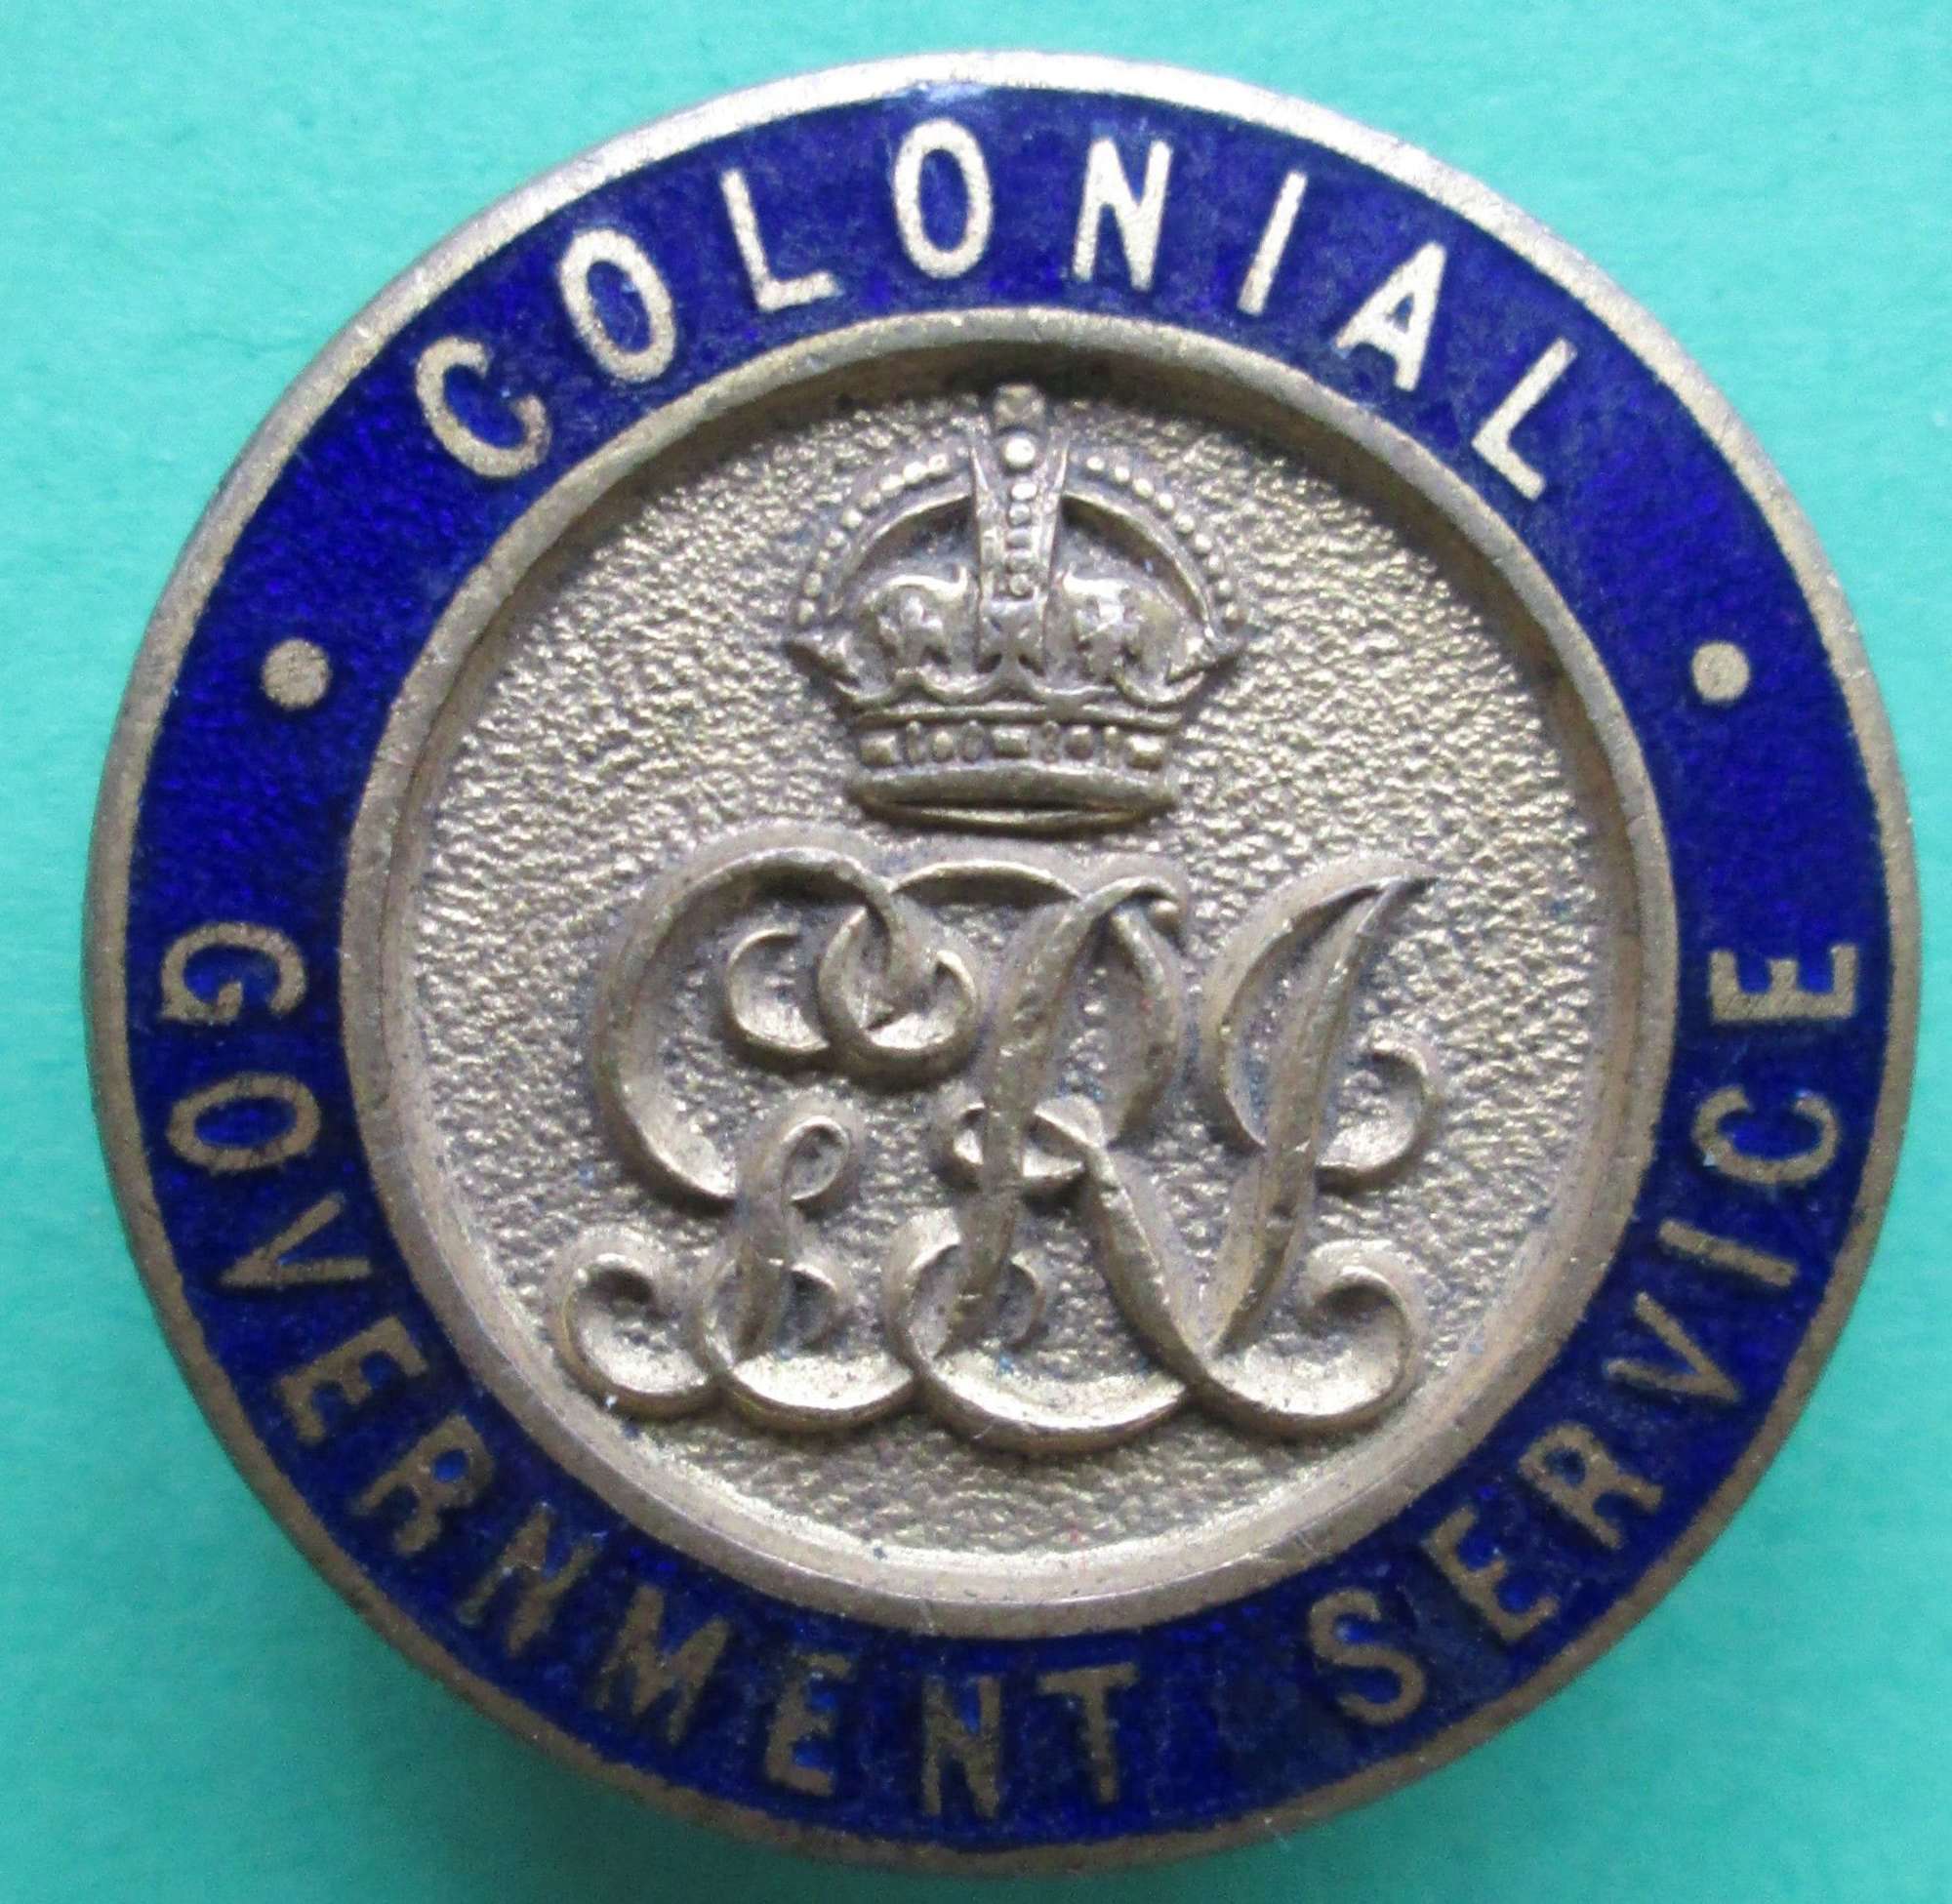 A COLONIAL GOVERNMENT SERVICE LAPEL BADGE